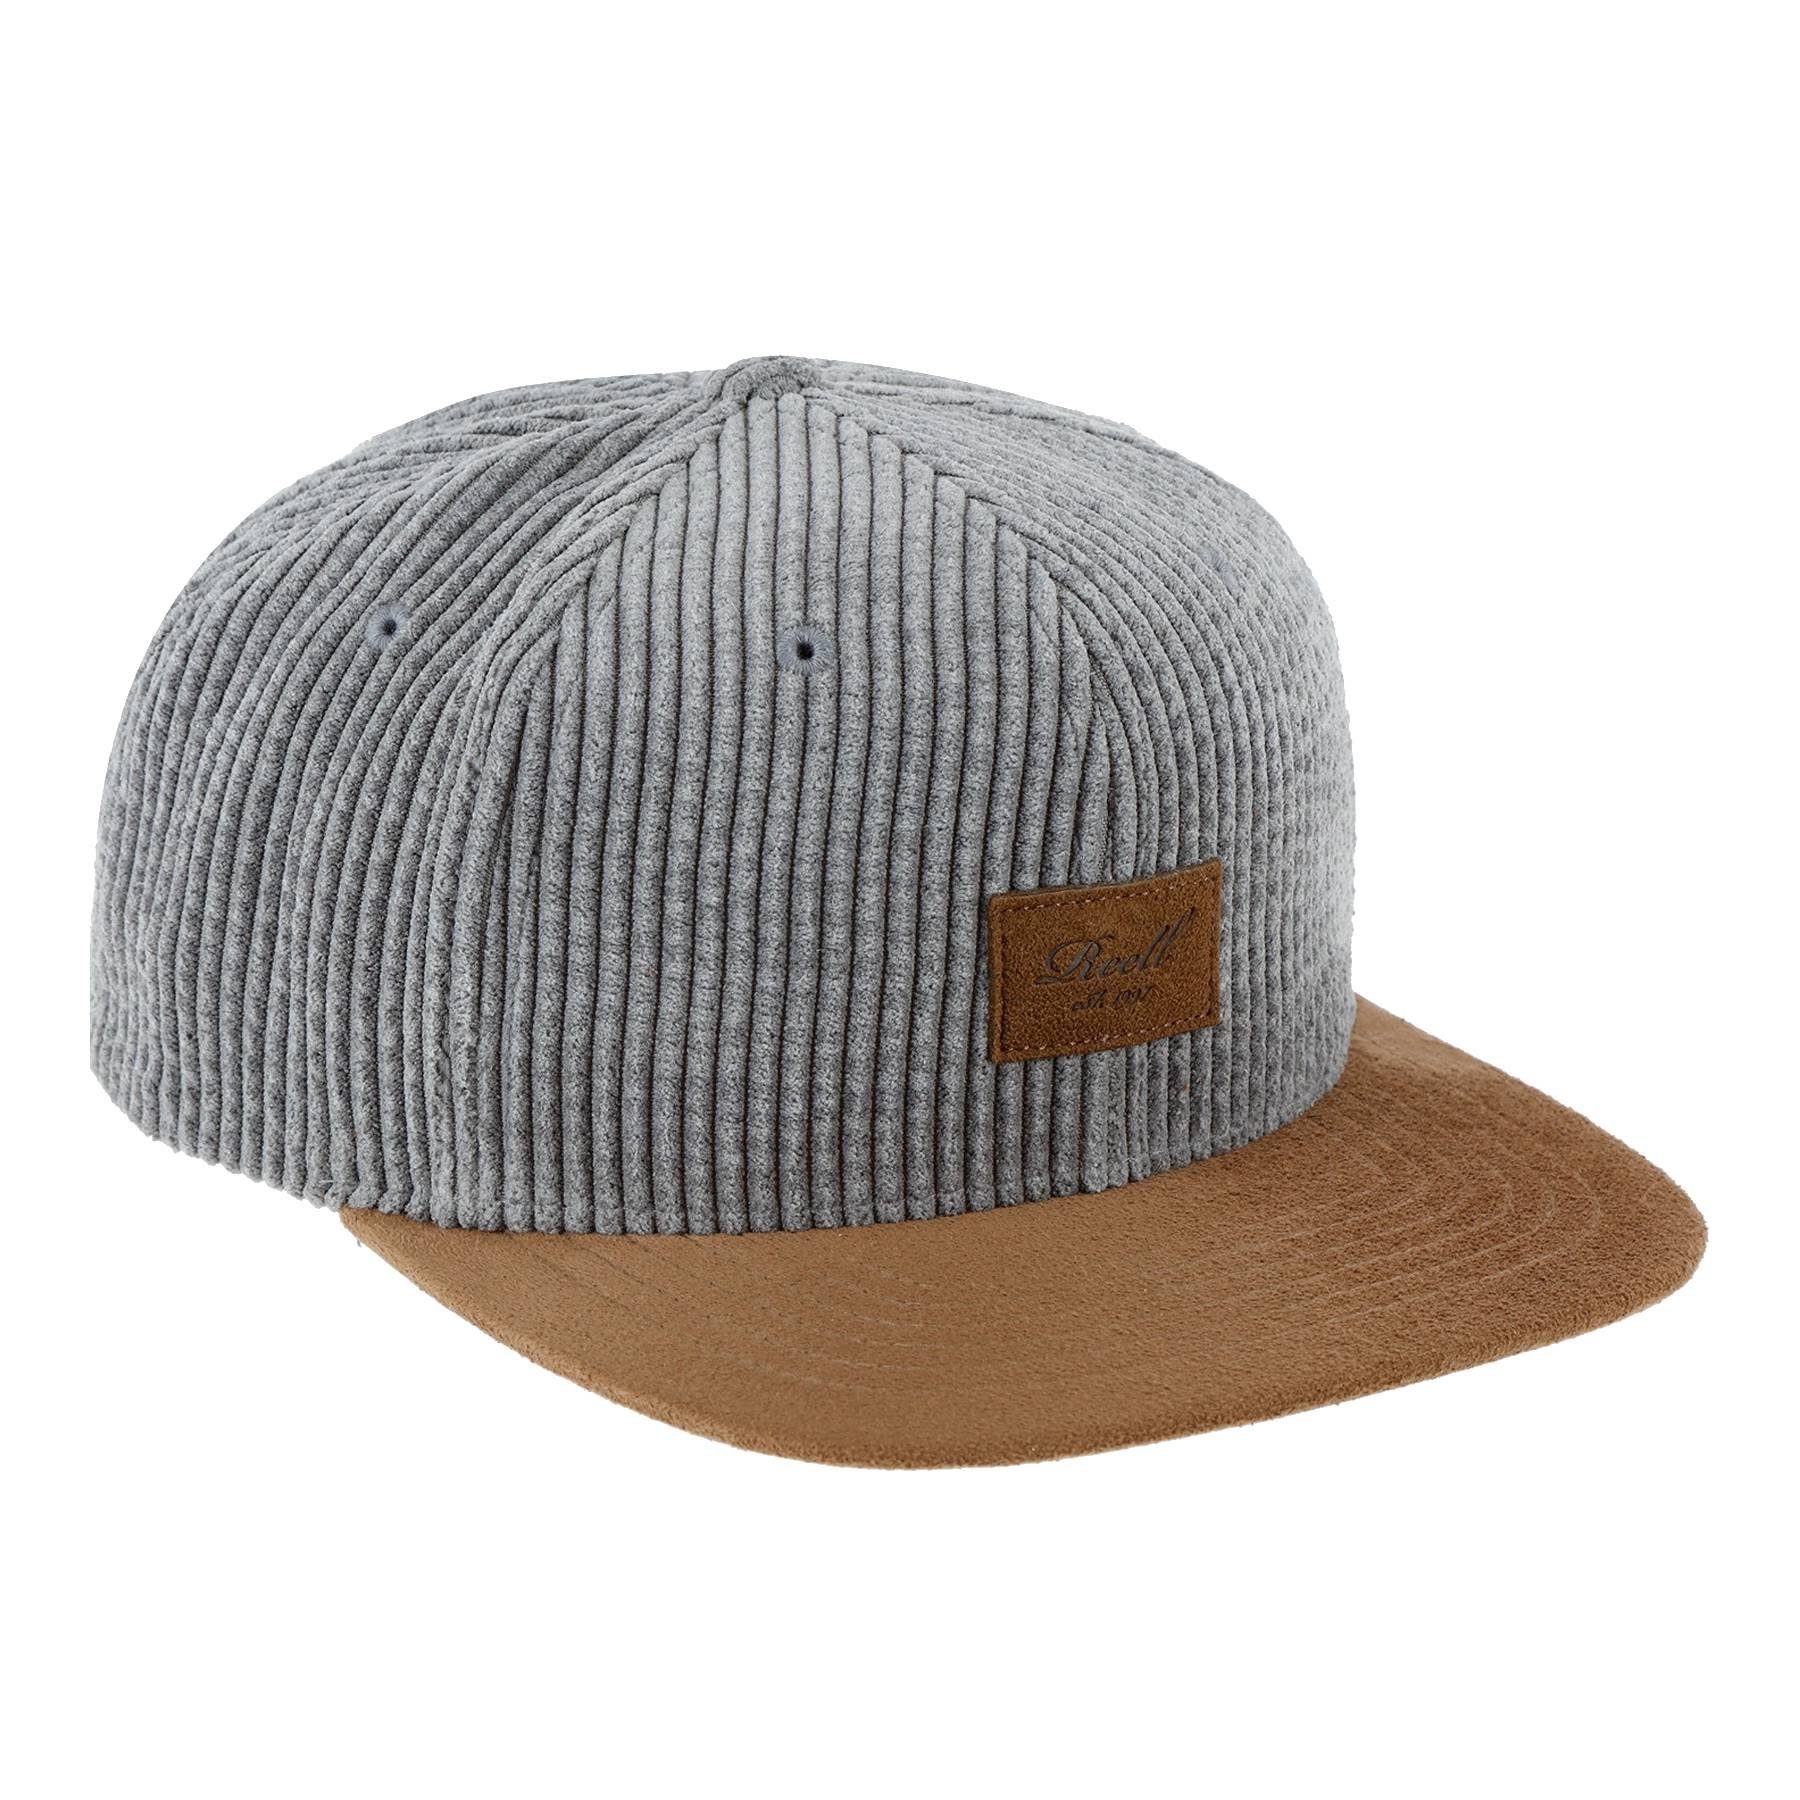 Cord Suede Baseball Cap co. Cap REELL silver (1-St) Reell